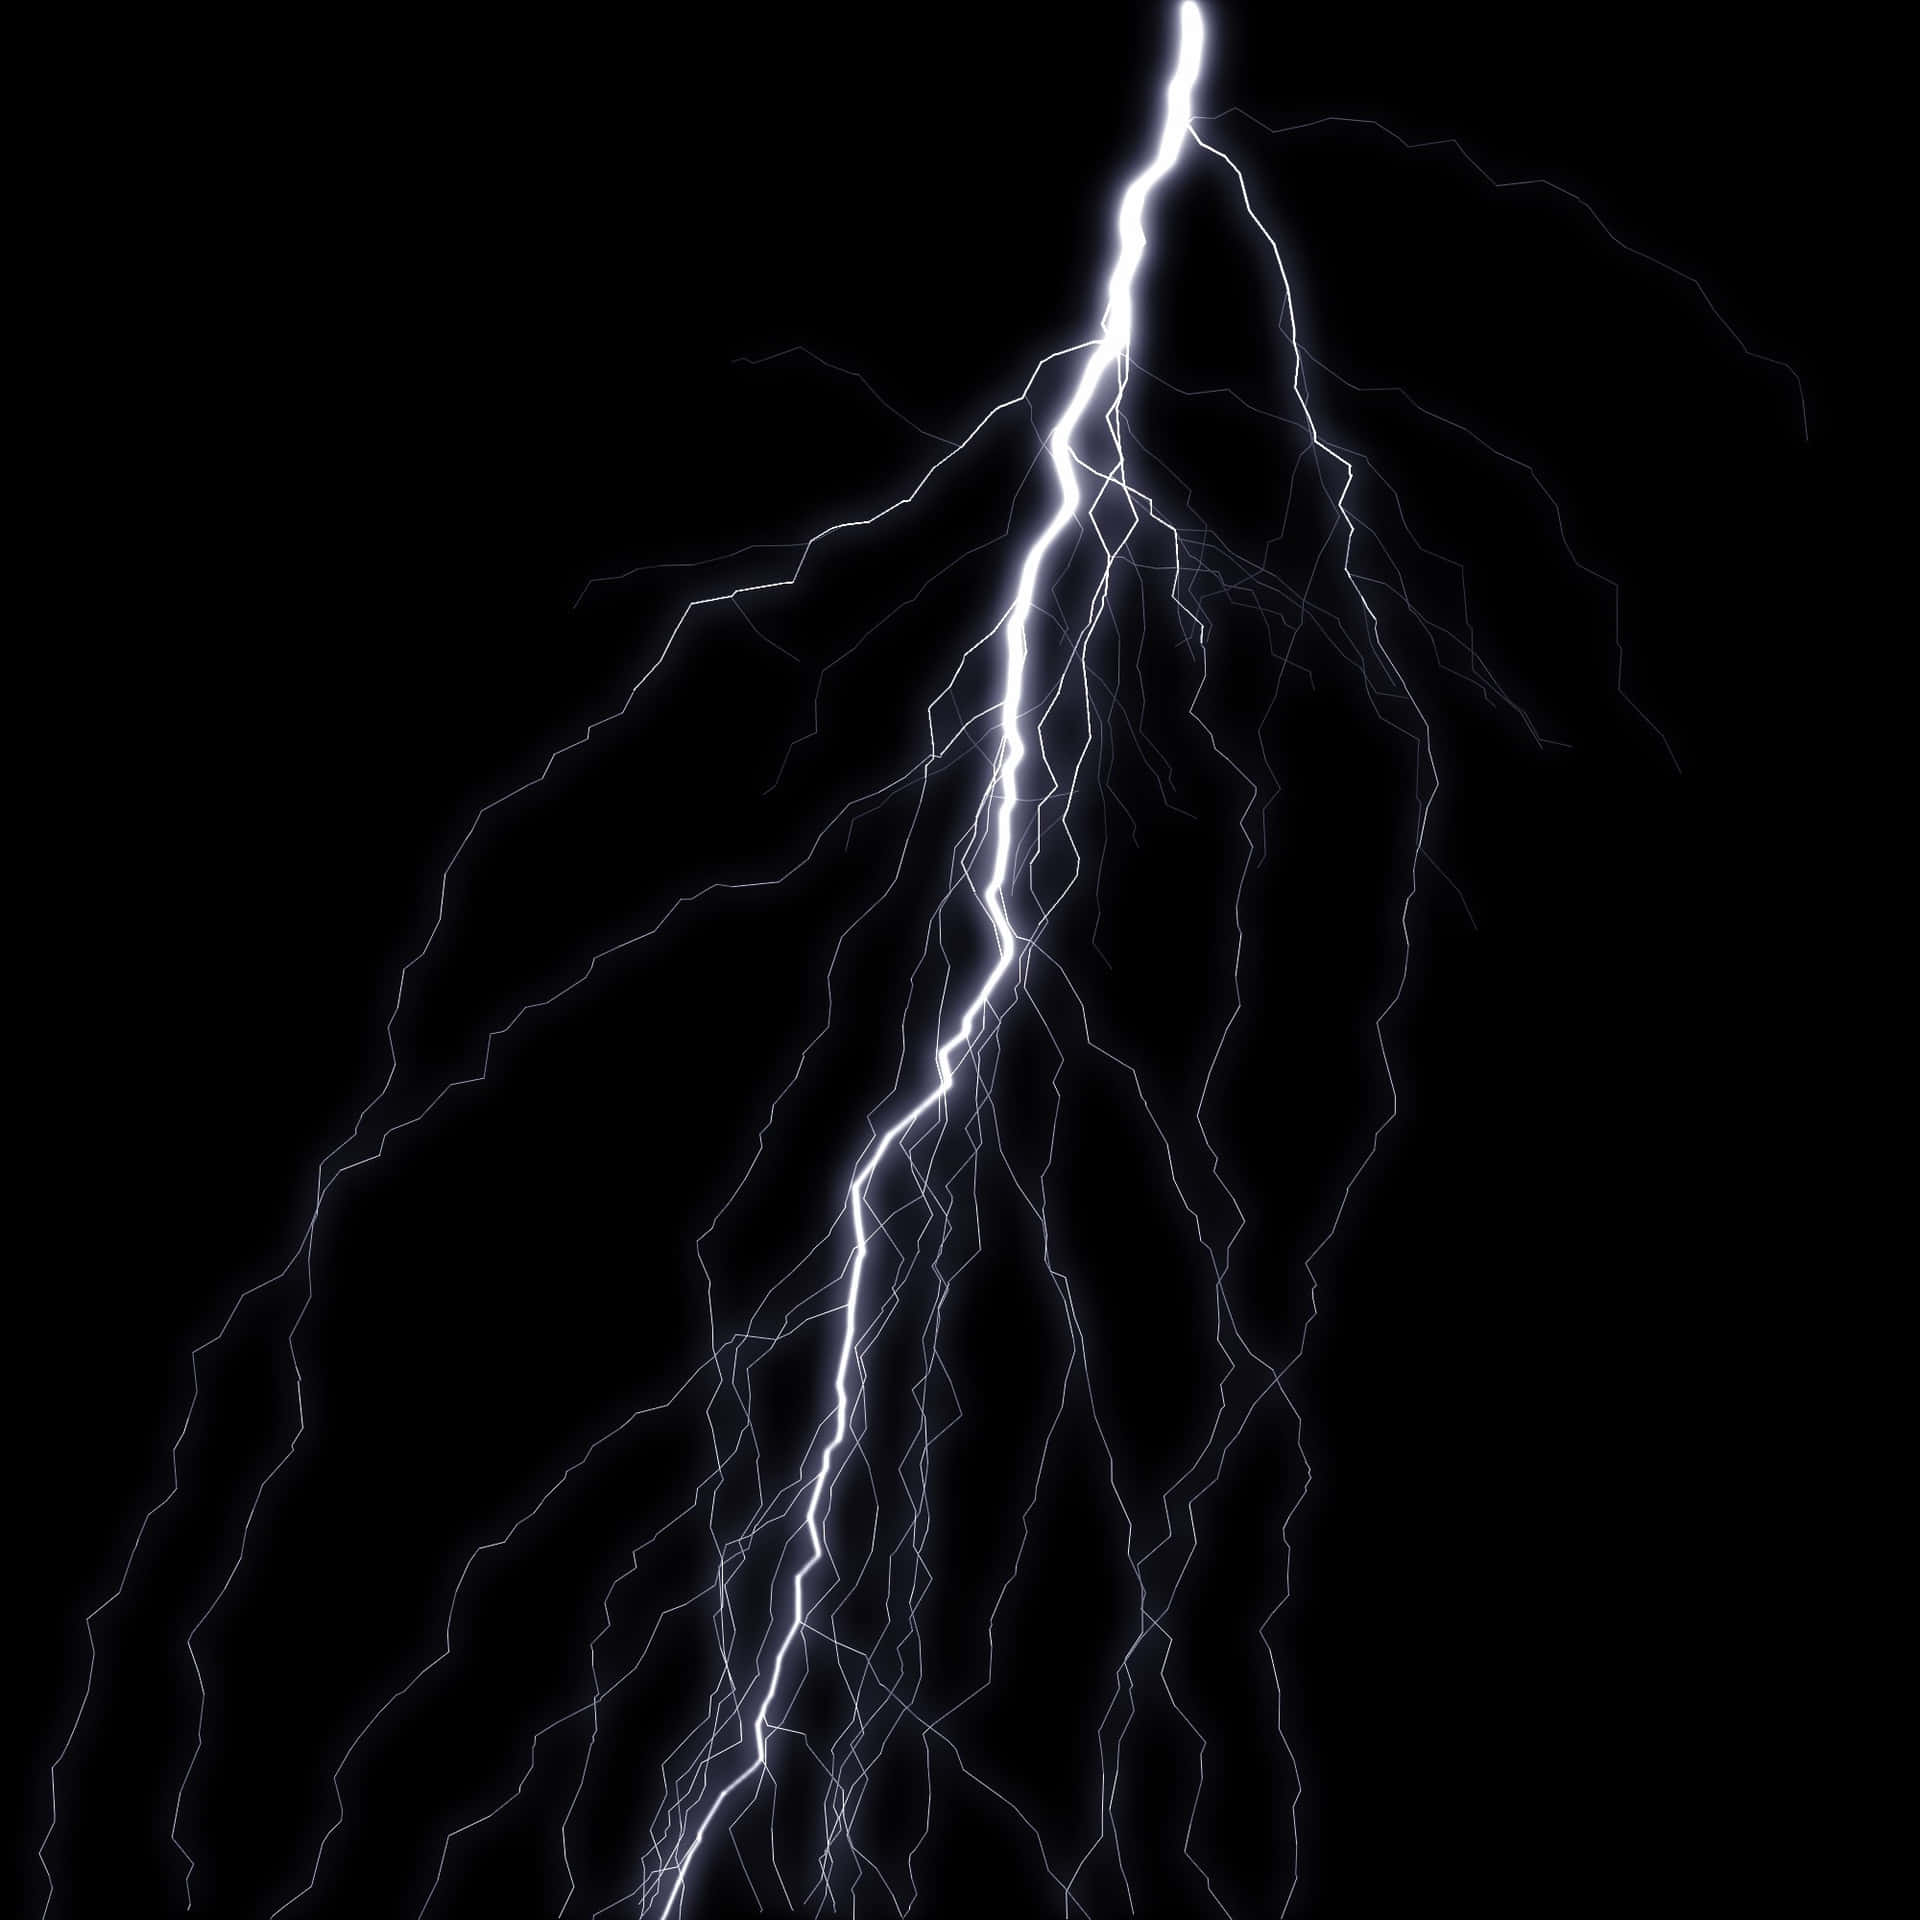 Recharge your iPhone with Lightning Bolt Wallpaper